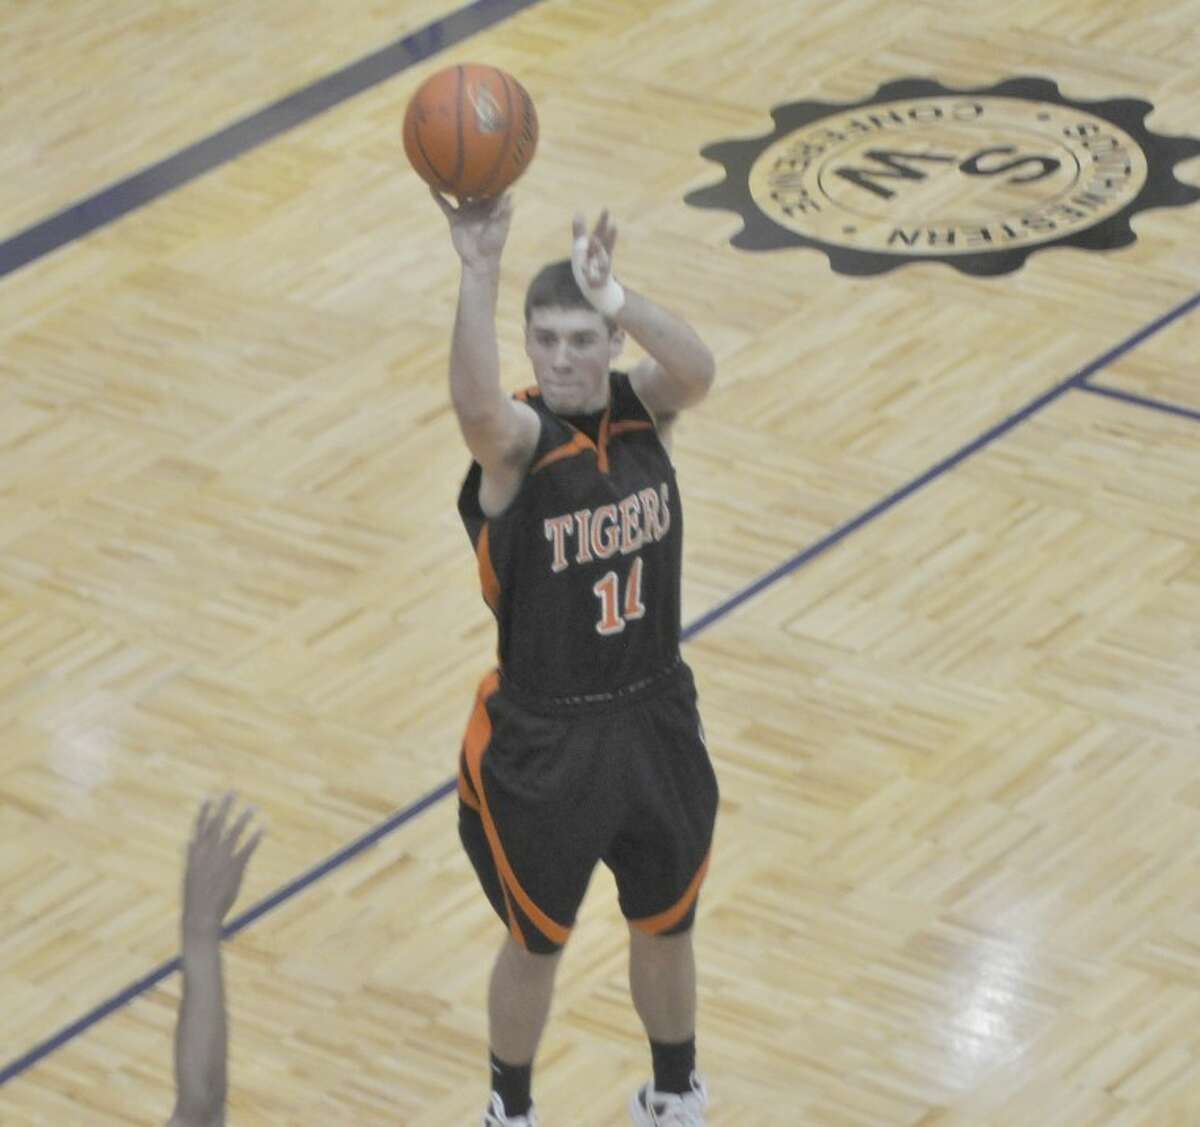 Tiger Drew Curtis releases a three-pointer.